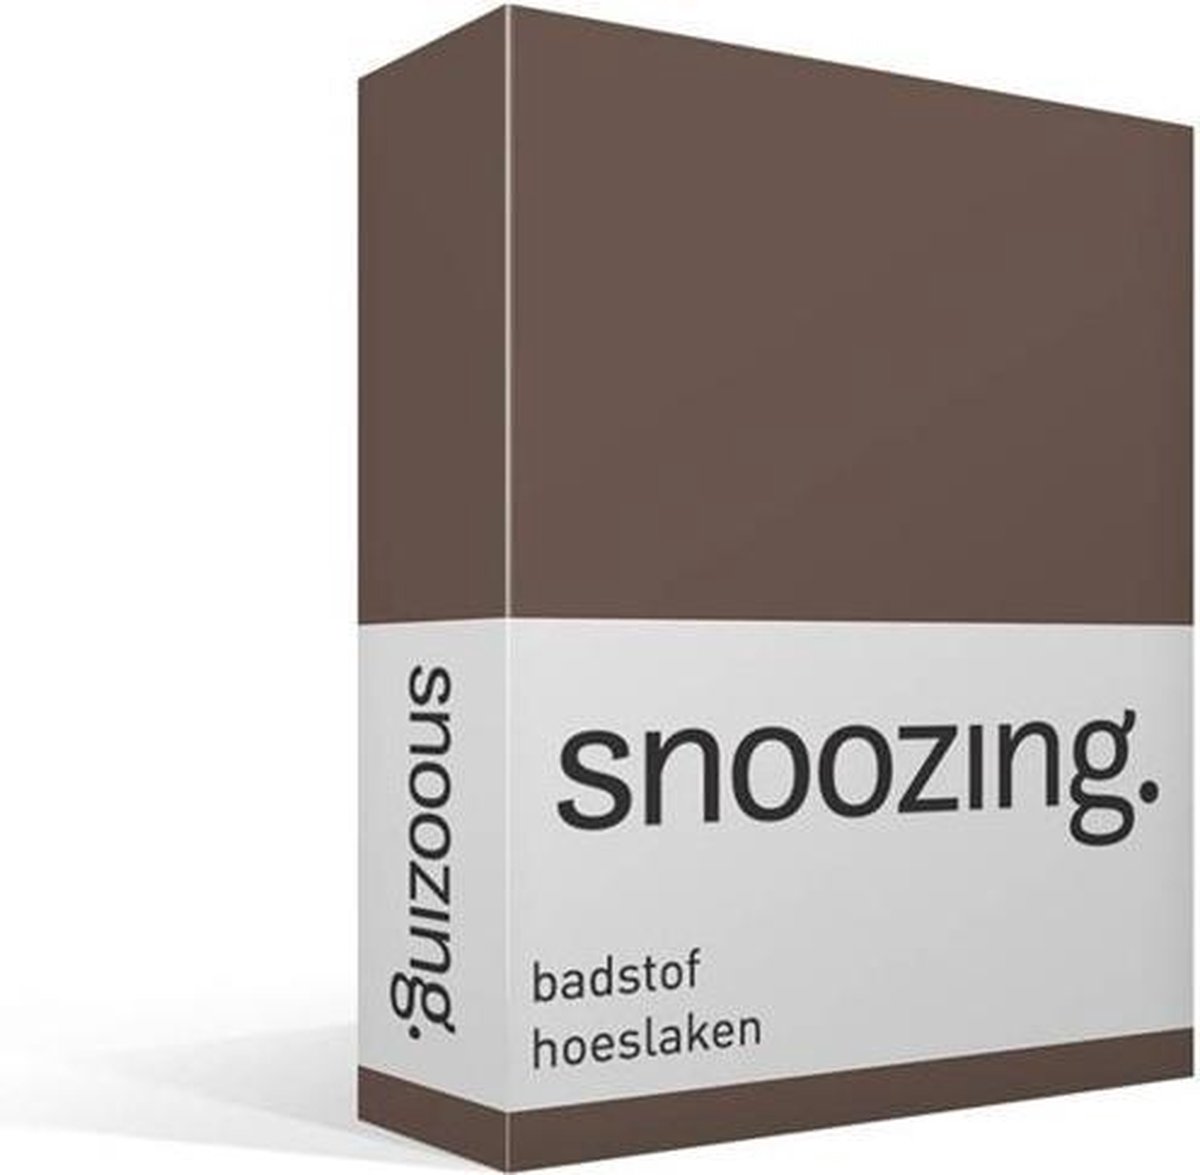 Snoozing Badstof Hoeslaken - 80% Katoen - 20% Polyester - Lits-jumeaux (180x200/220 Of 200x200 Cm) - Taupe